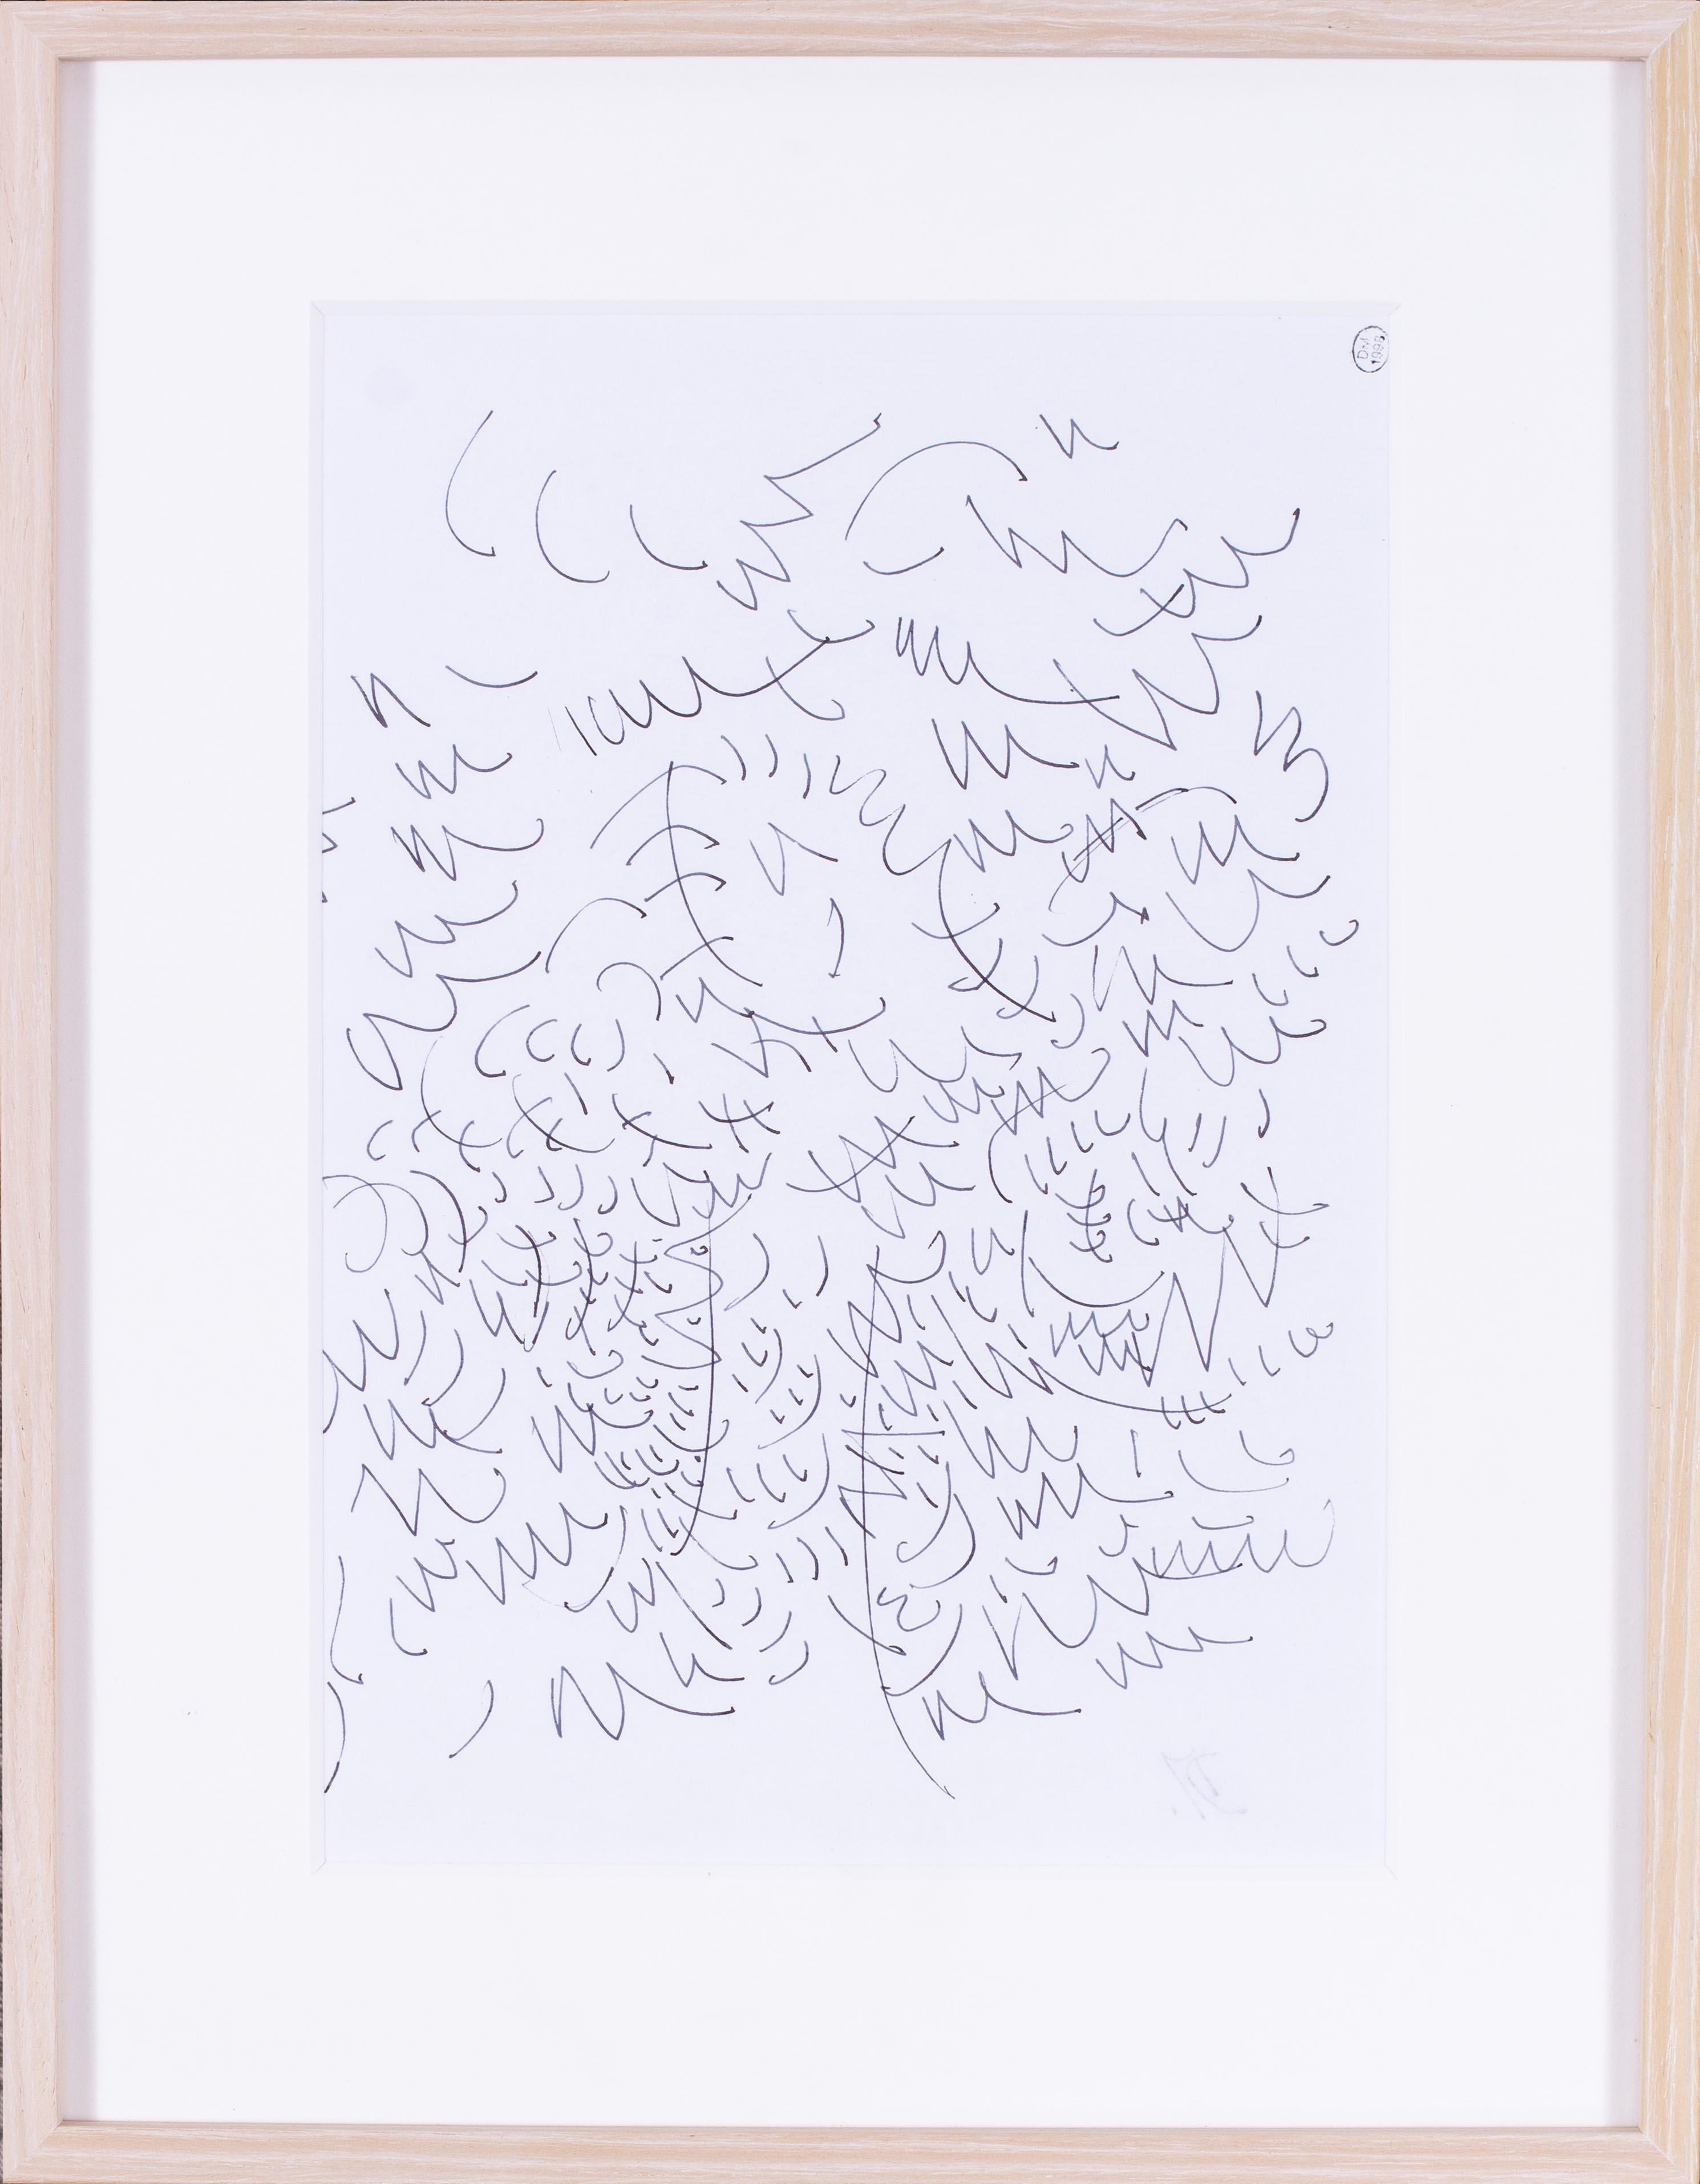 This is a beautiful and fine avant-garde finished drawing of a tree by the French female artist, Dora Maar.  Dora Maar was a distinctive artist in her own right marked by striking photography, innovative techniques, and an unwavering exploration of